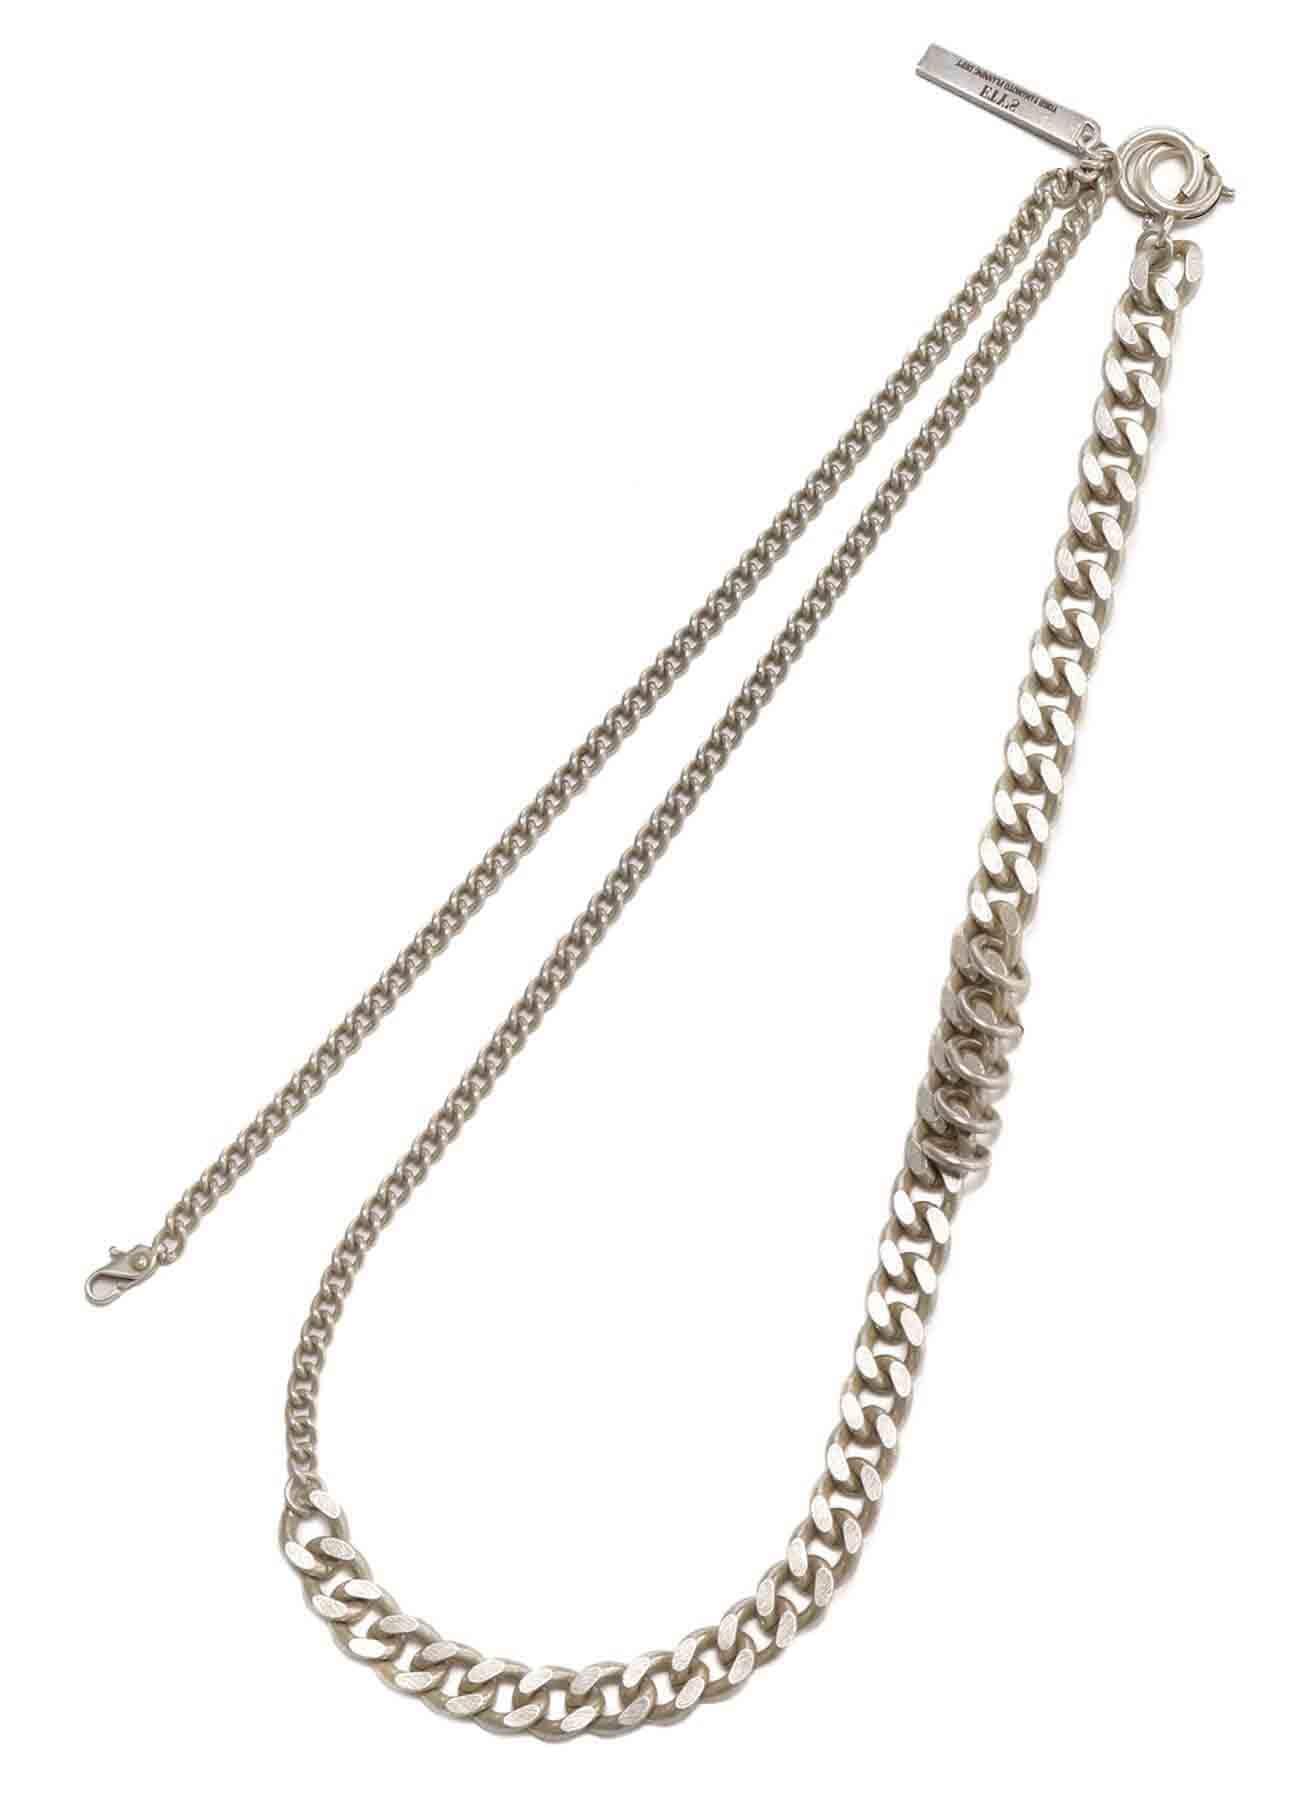 6-WAY CURVED CHAIN BRACELET NECKLACE